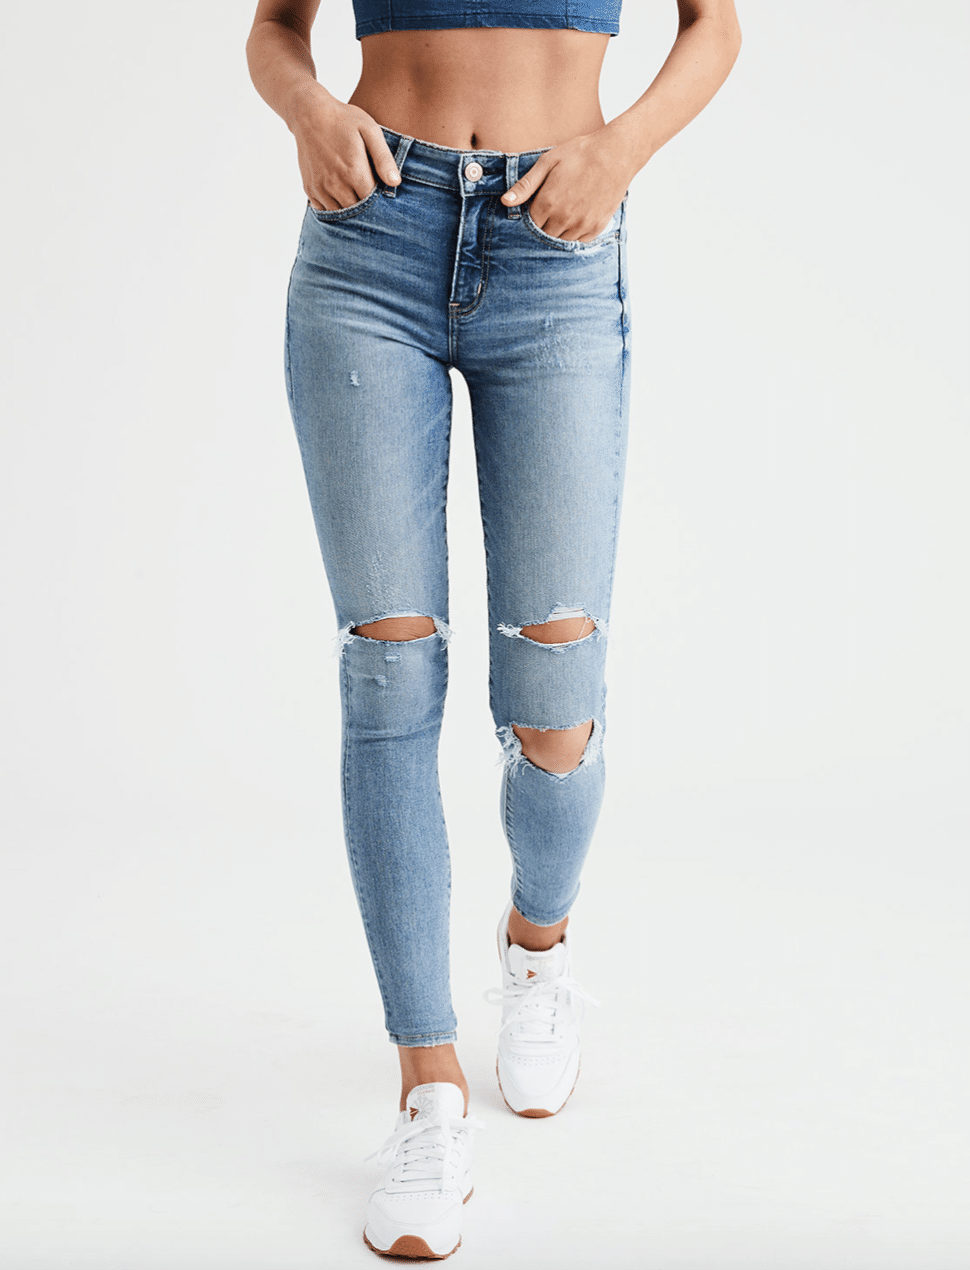 best american eagle jeans